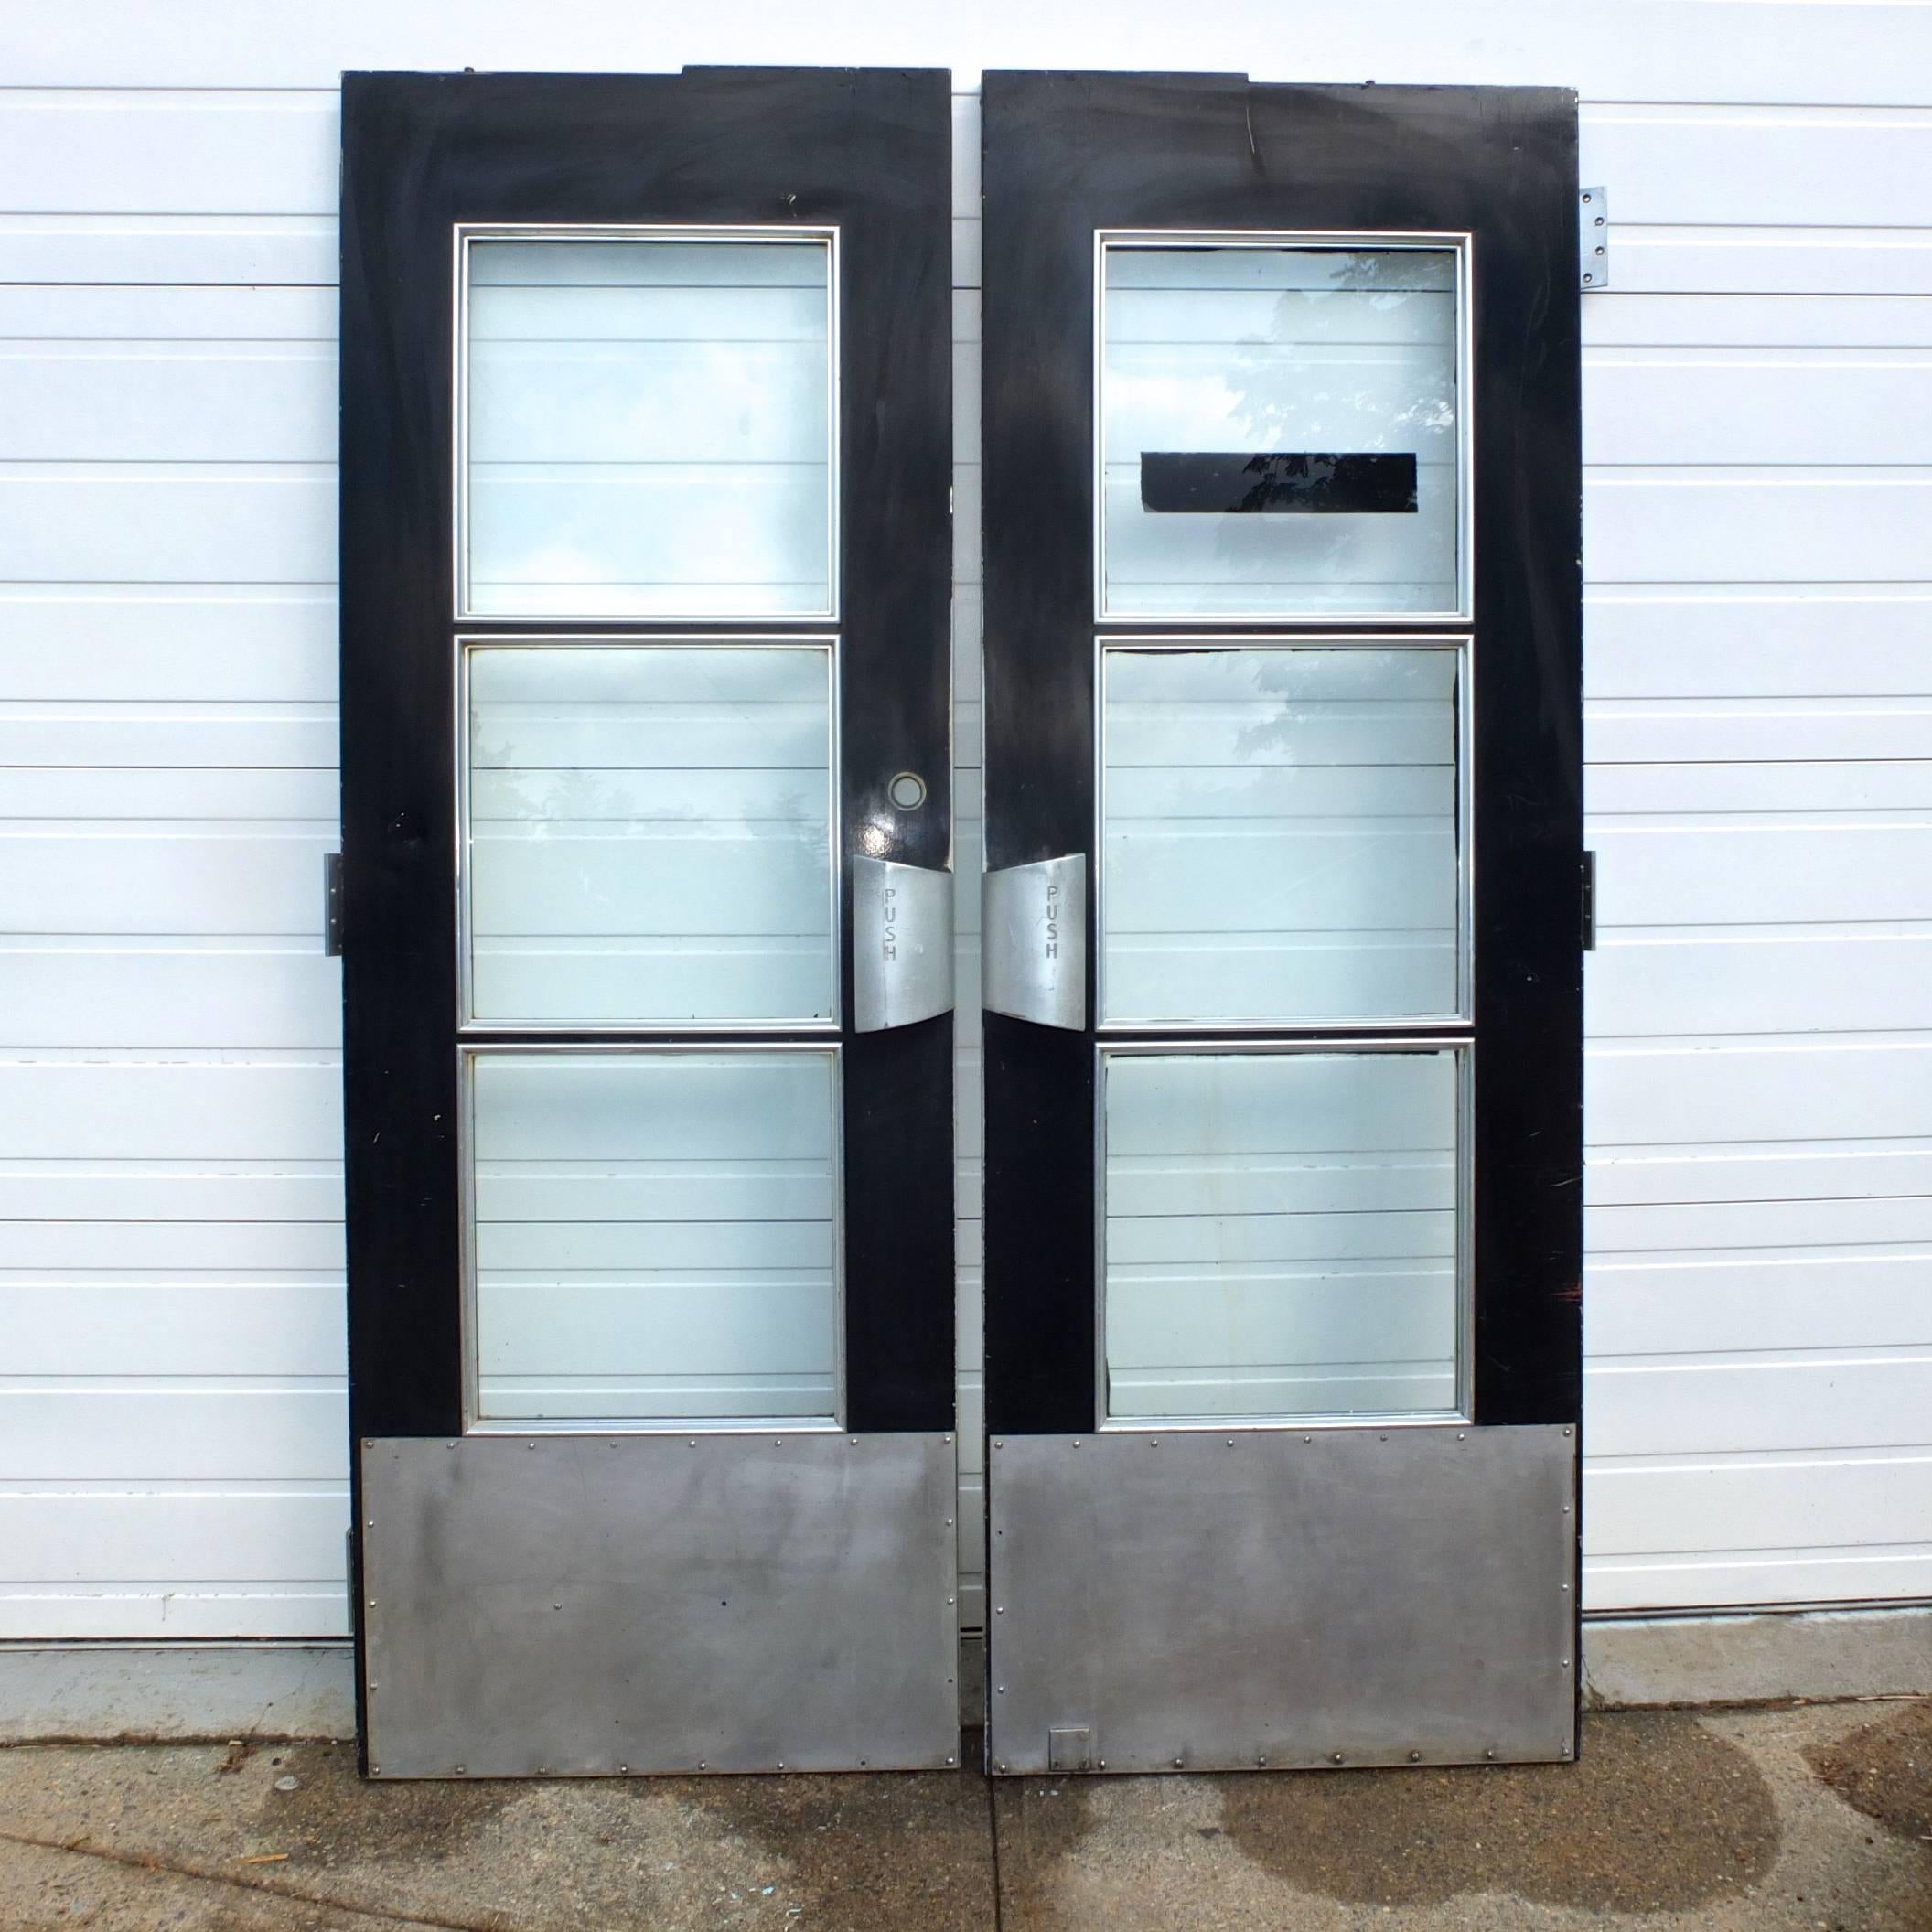 Pair of double doors made of aluminum and glass from the Gibbs and COX designed SS United States transatlantic ocean liner whose maiden voyage was in 1952. Streamline Art Deco styling. Heavy duty aluminum hinges and handles. Original paint and